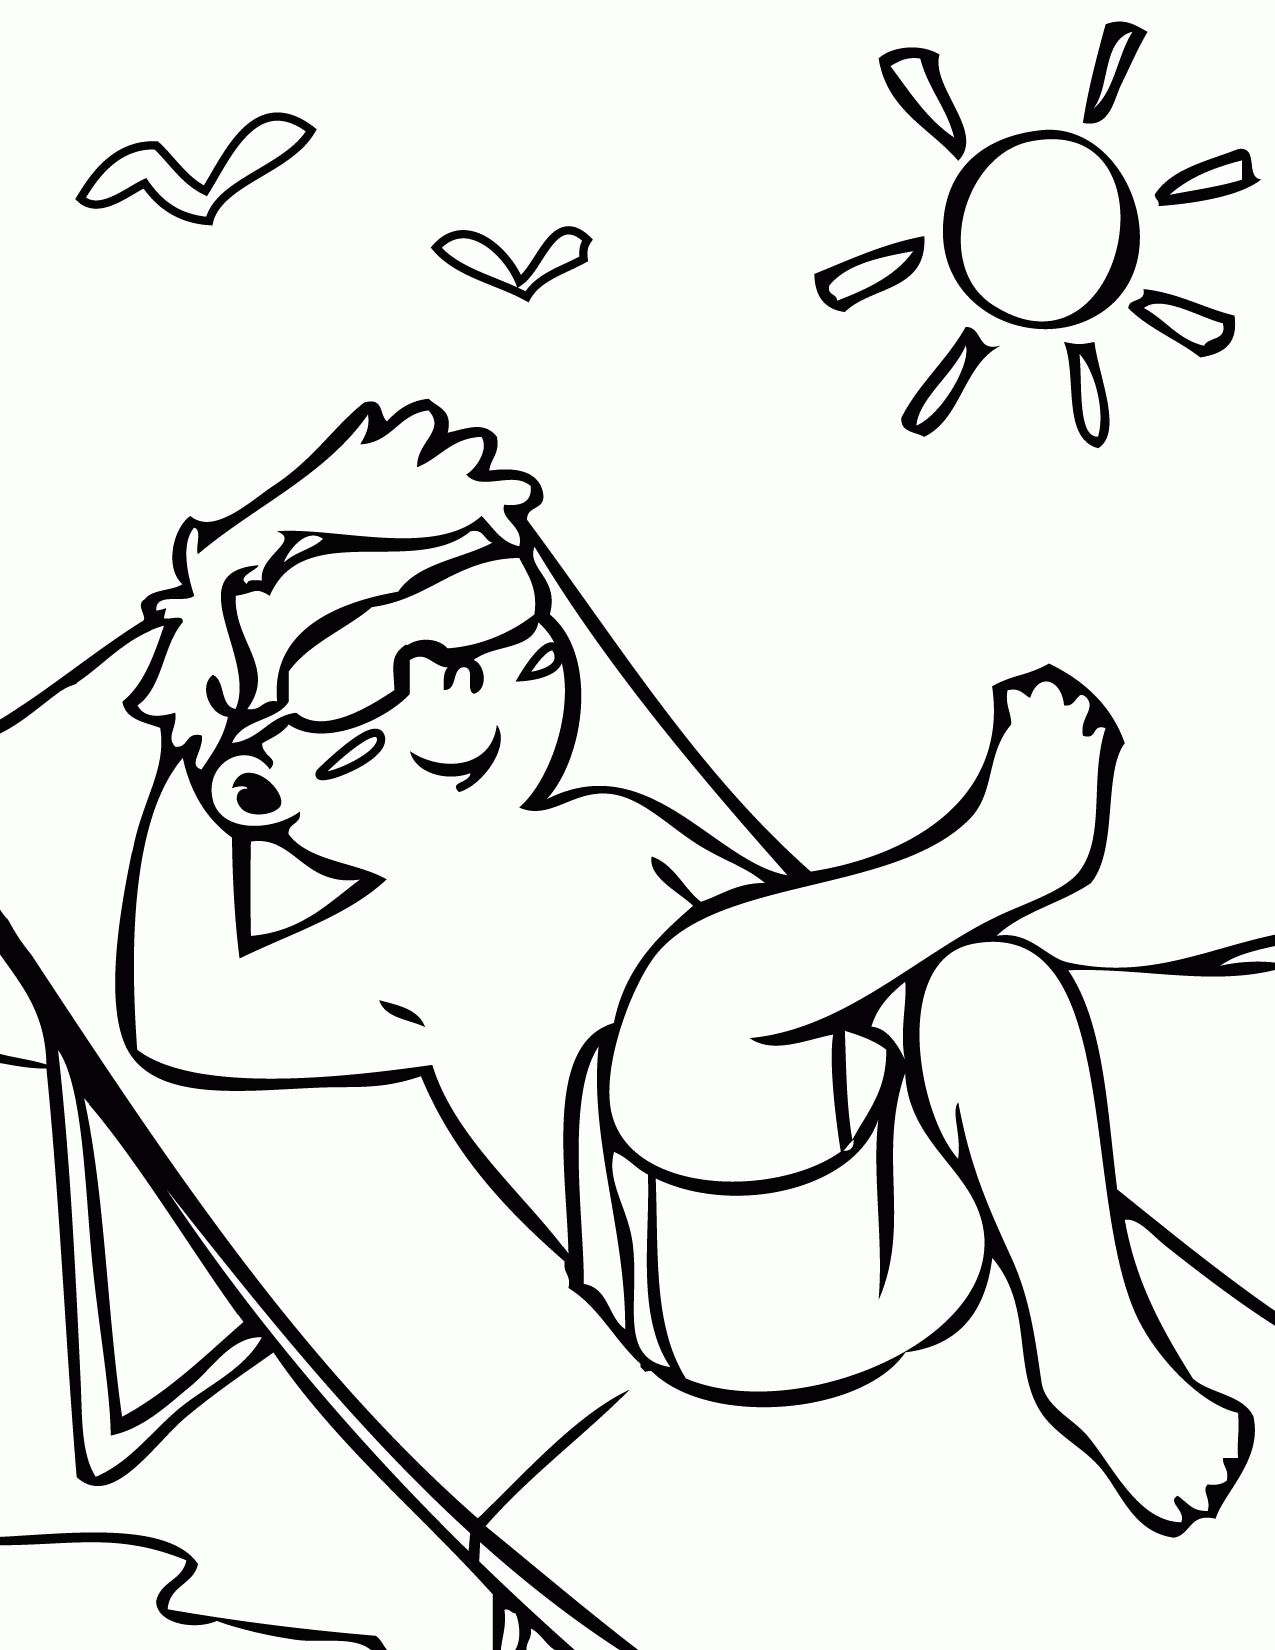 Sun Bathing Coloring Page - Handipoints